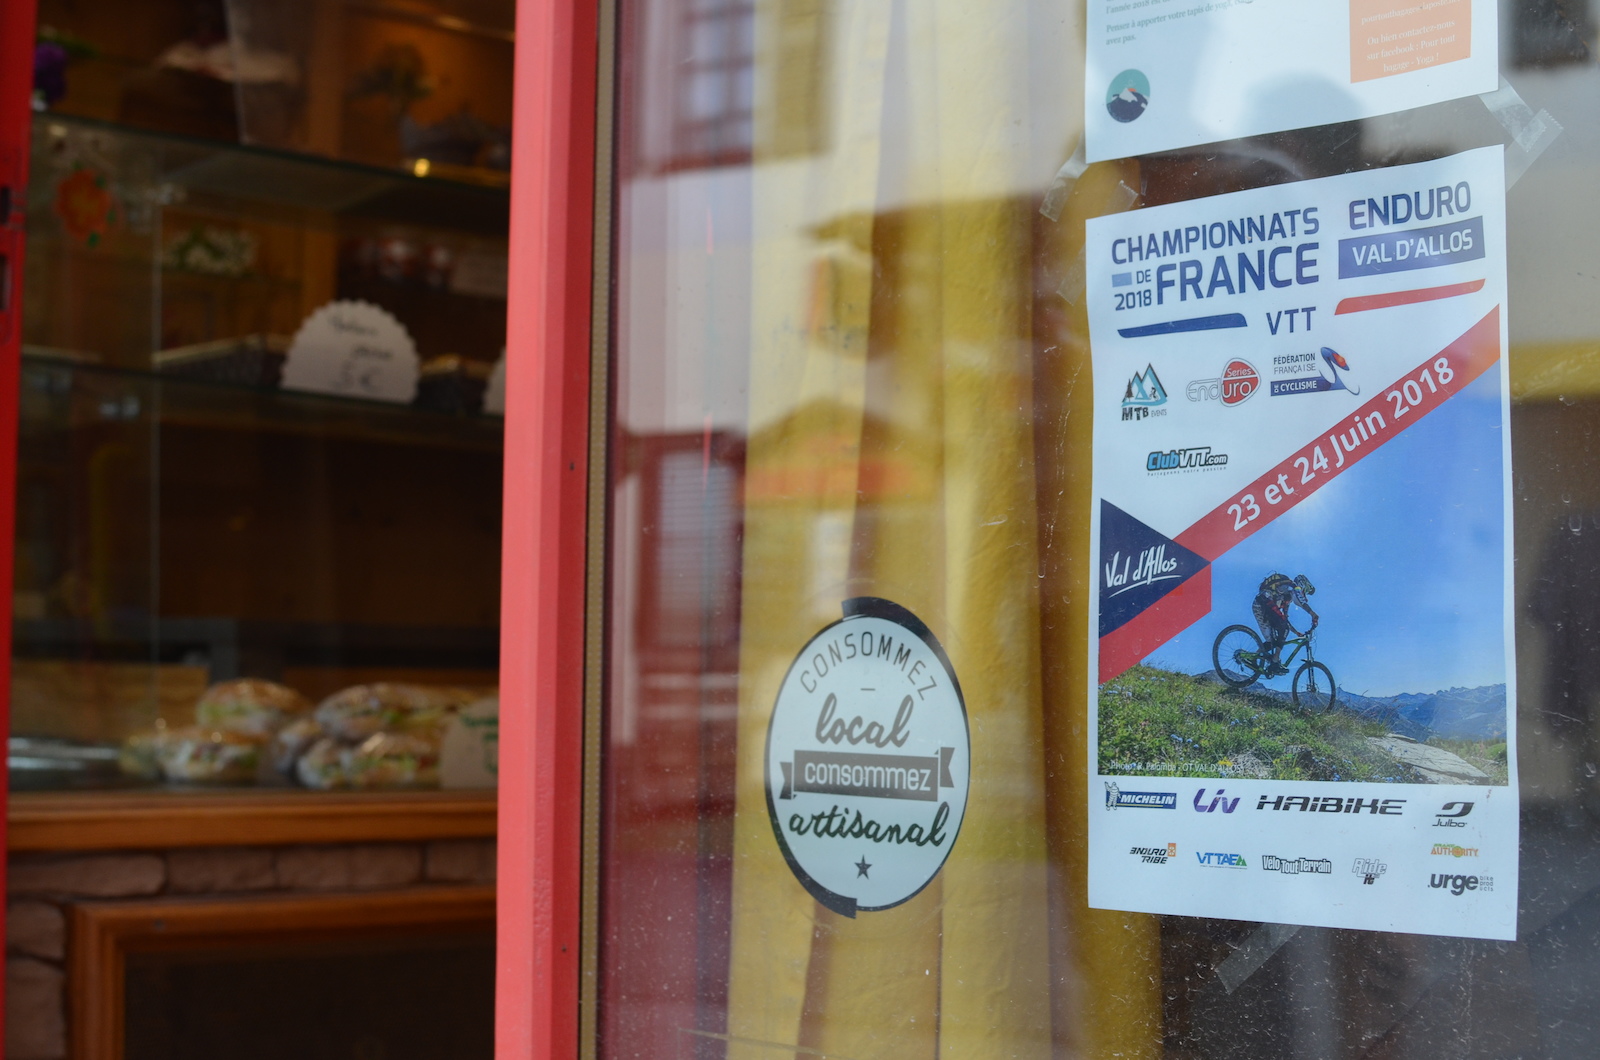 In between croissants and tasty local sweets, a mountainbike race has its place too